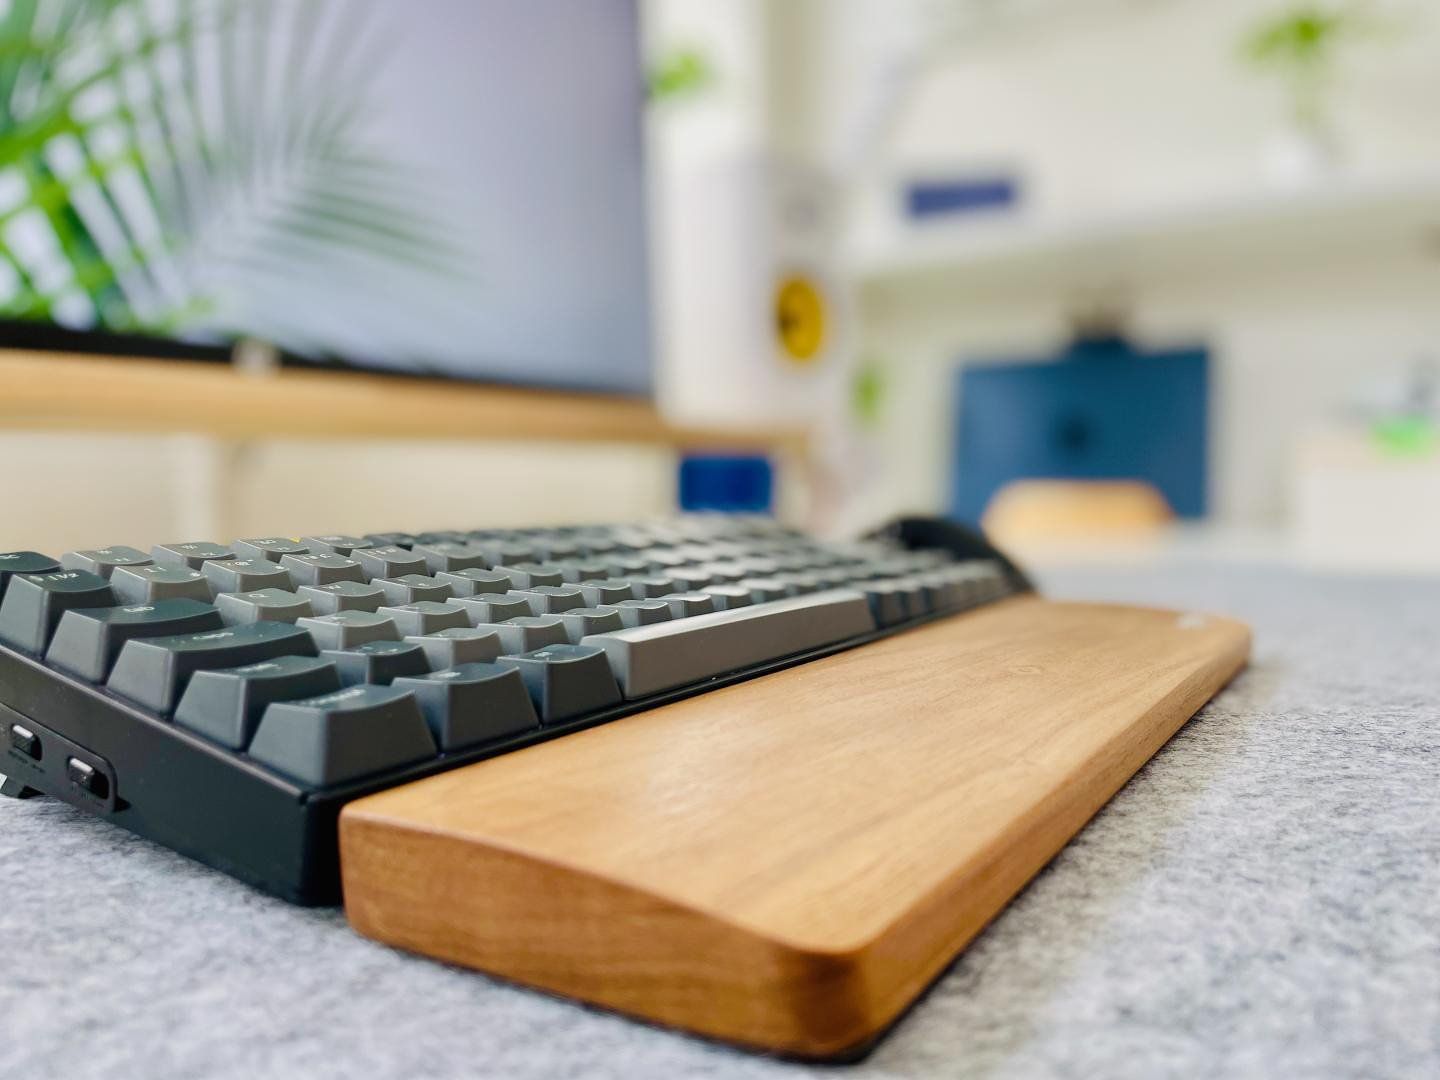 A Keychron K2 mechanical keyboard with a wooden wrist rest